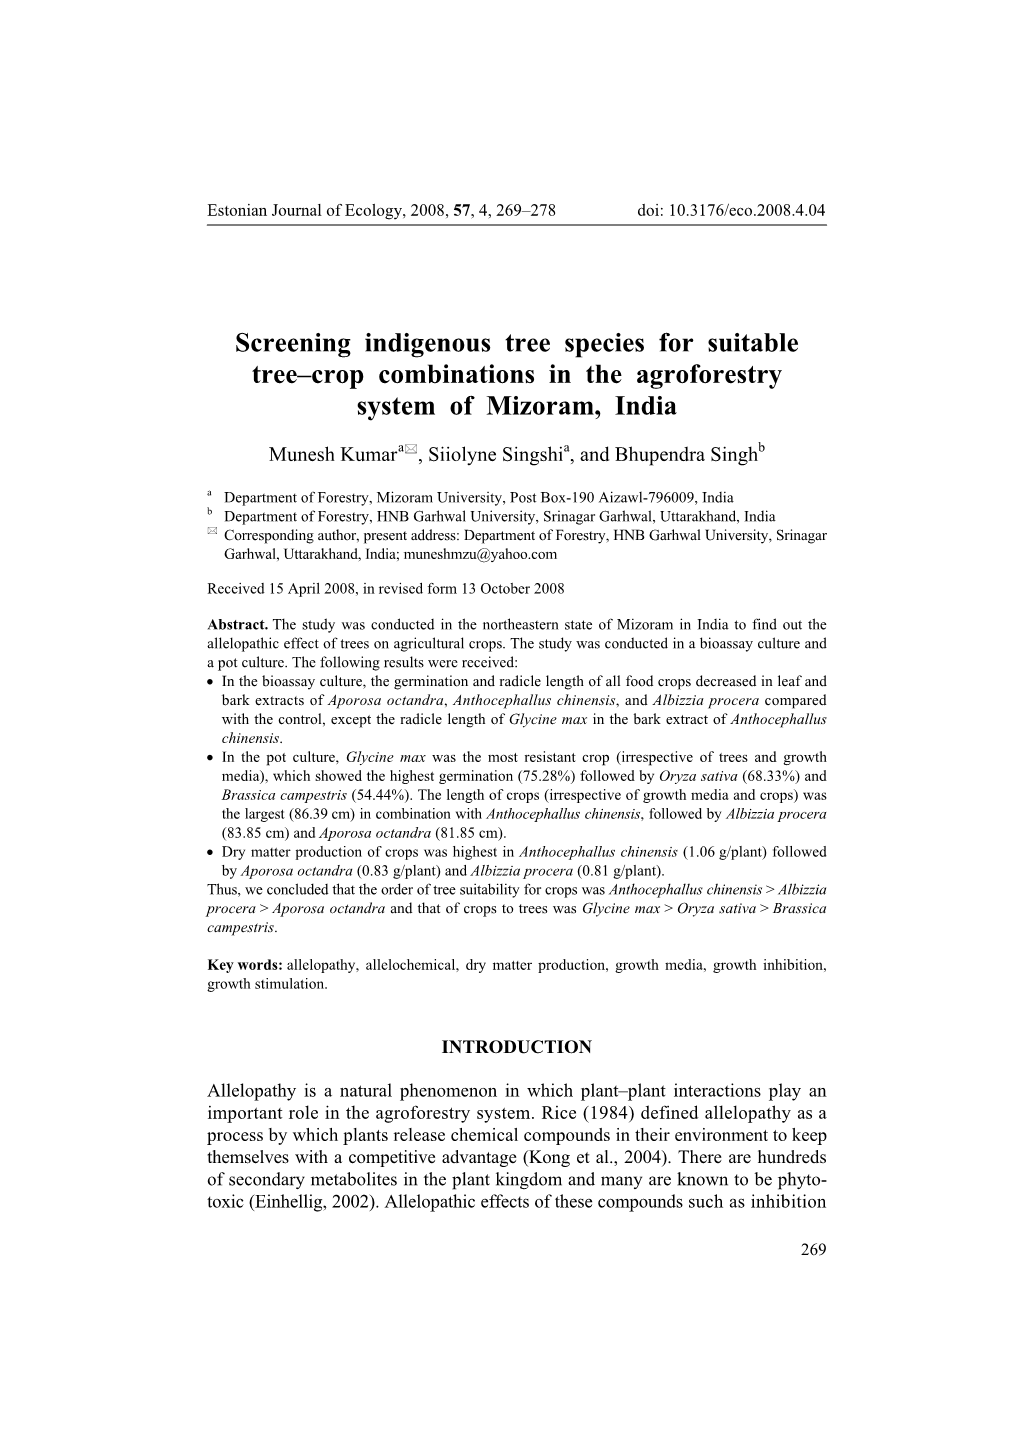 Screening Indigenous Tree Species for Suitable Treeœcrop Combinations in the Agroforestry System of Mizoram, Indi